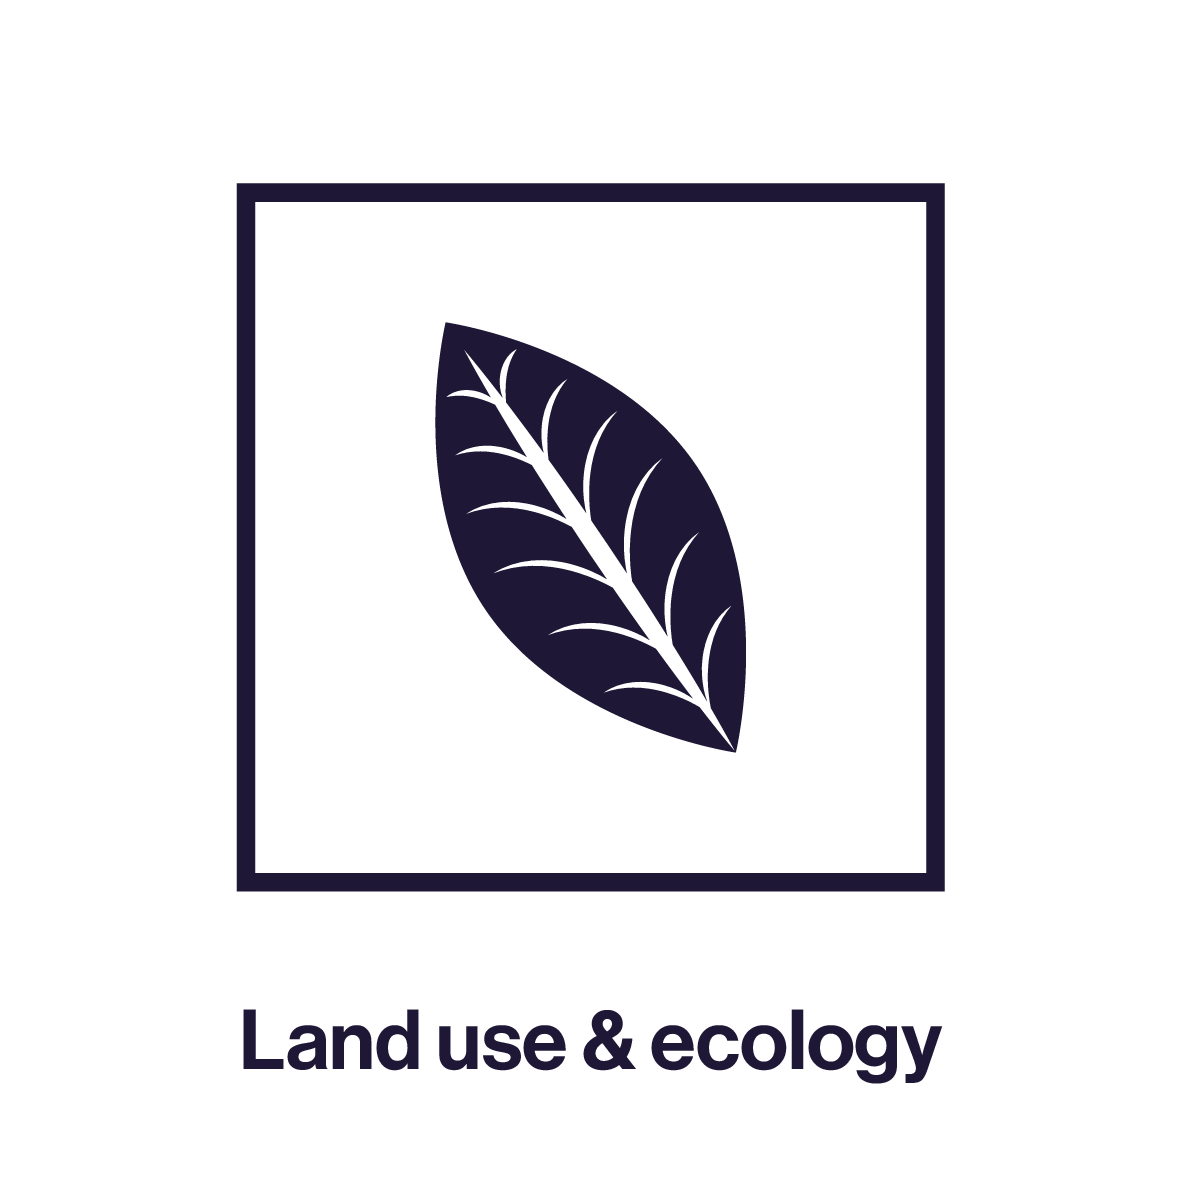 BREEAM assessment category, land use & ecology icon